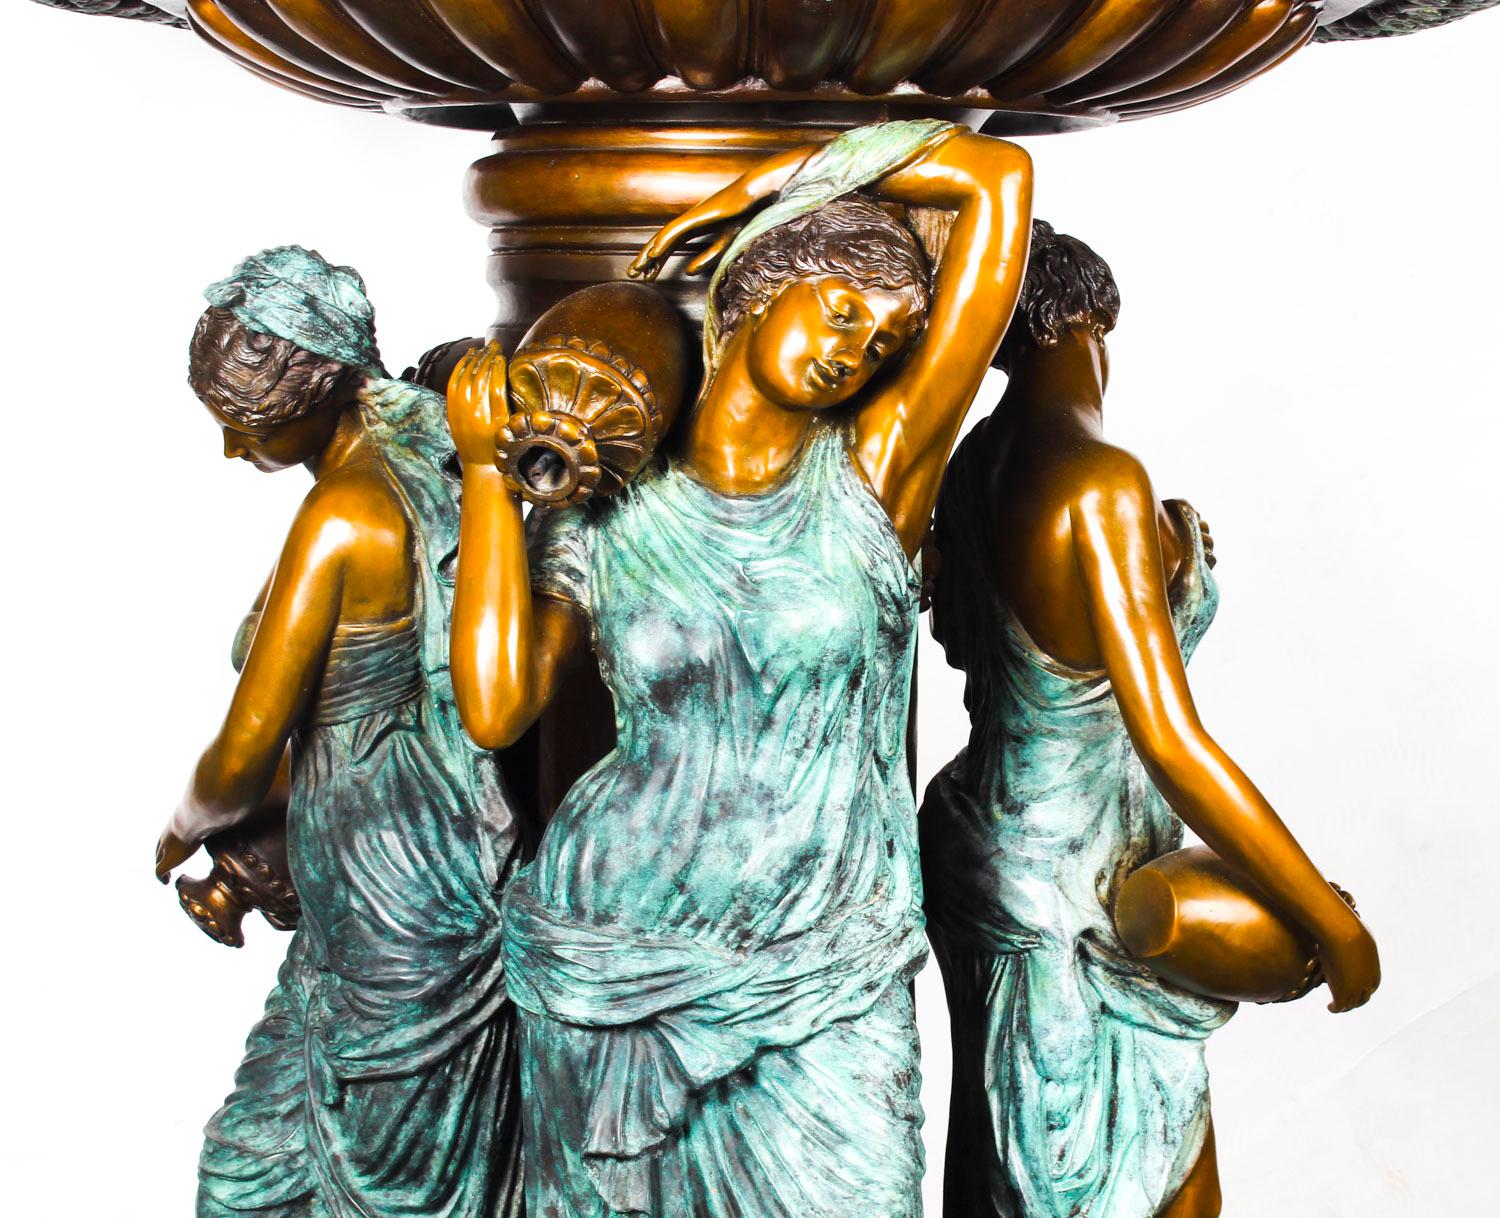 French Vintage Monumental Neo-Classical Revival Bronze Sculptural Pond Fountain 20th C For Sale